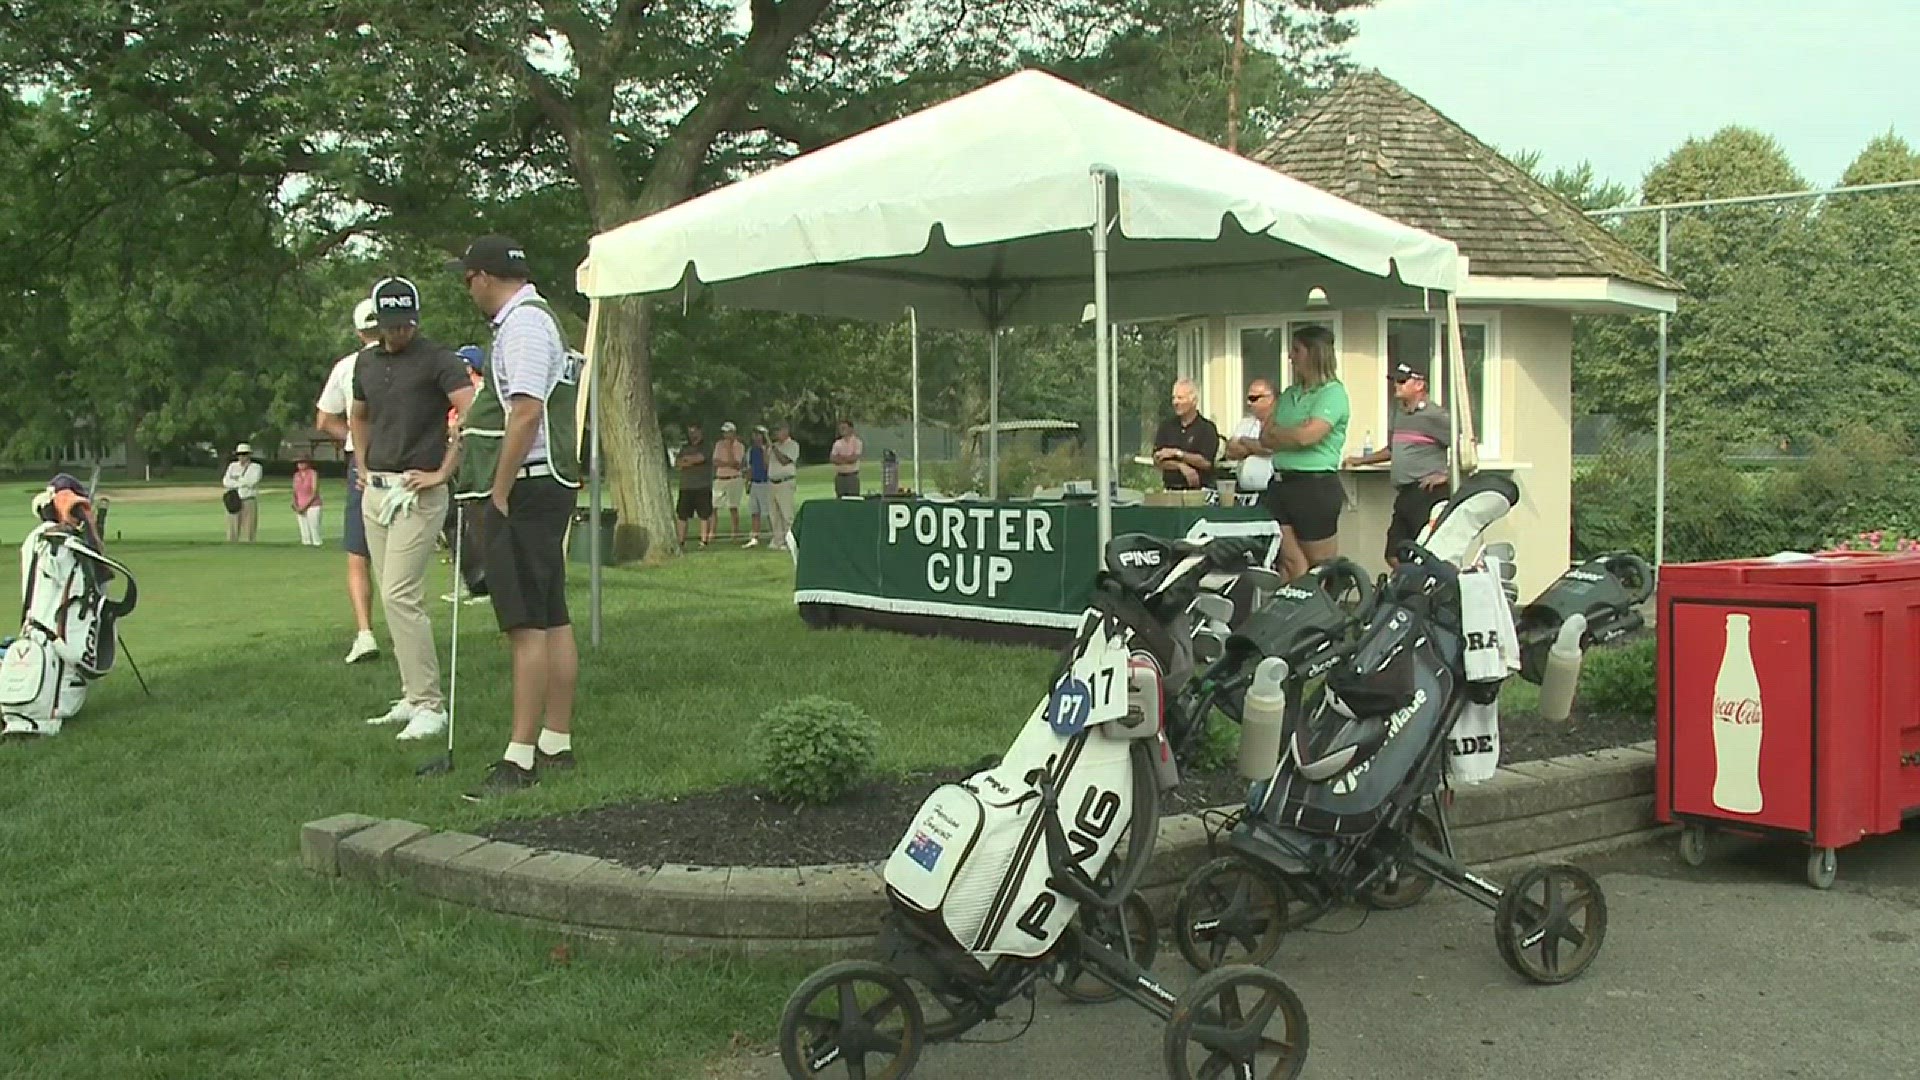 Some great shots highlighted the second round of the Porter Cup golf tournament.